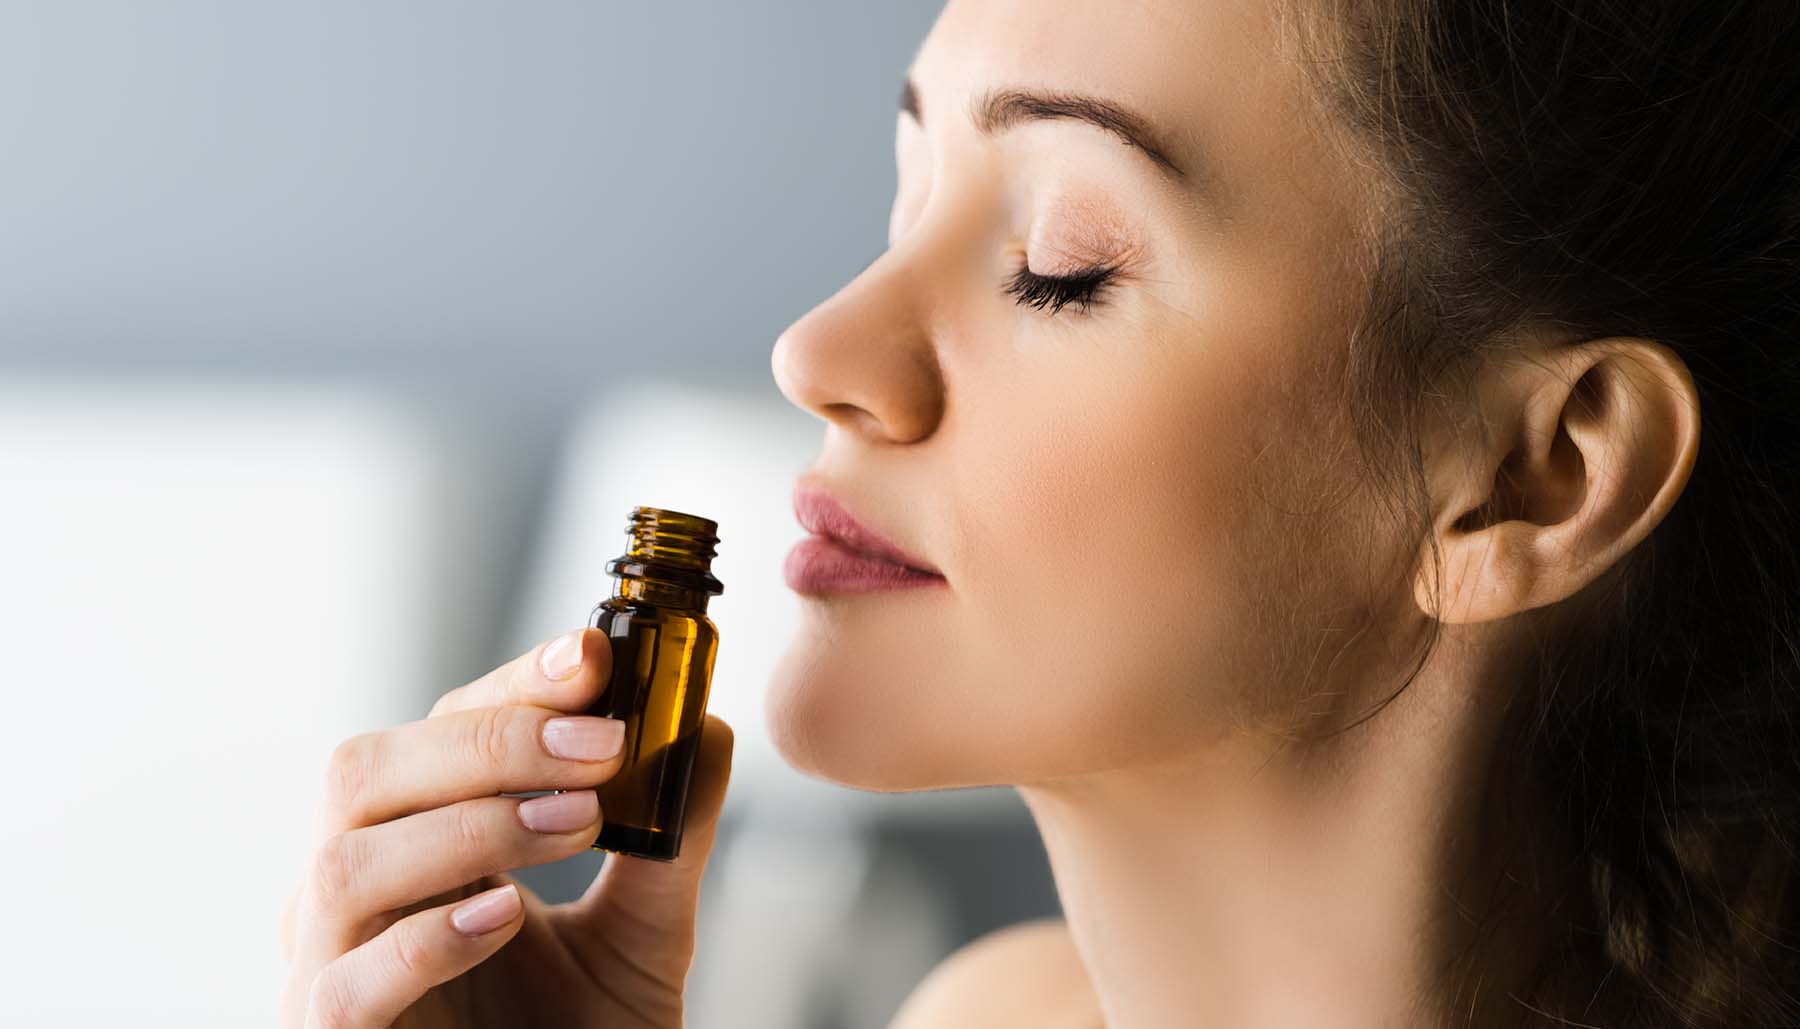 woman deeply inhaling scent of aromatherapy oil with her eyes closed